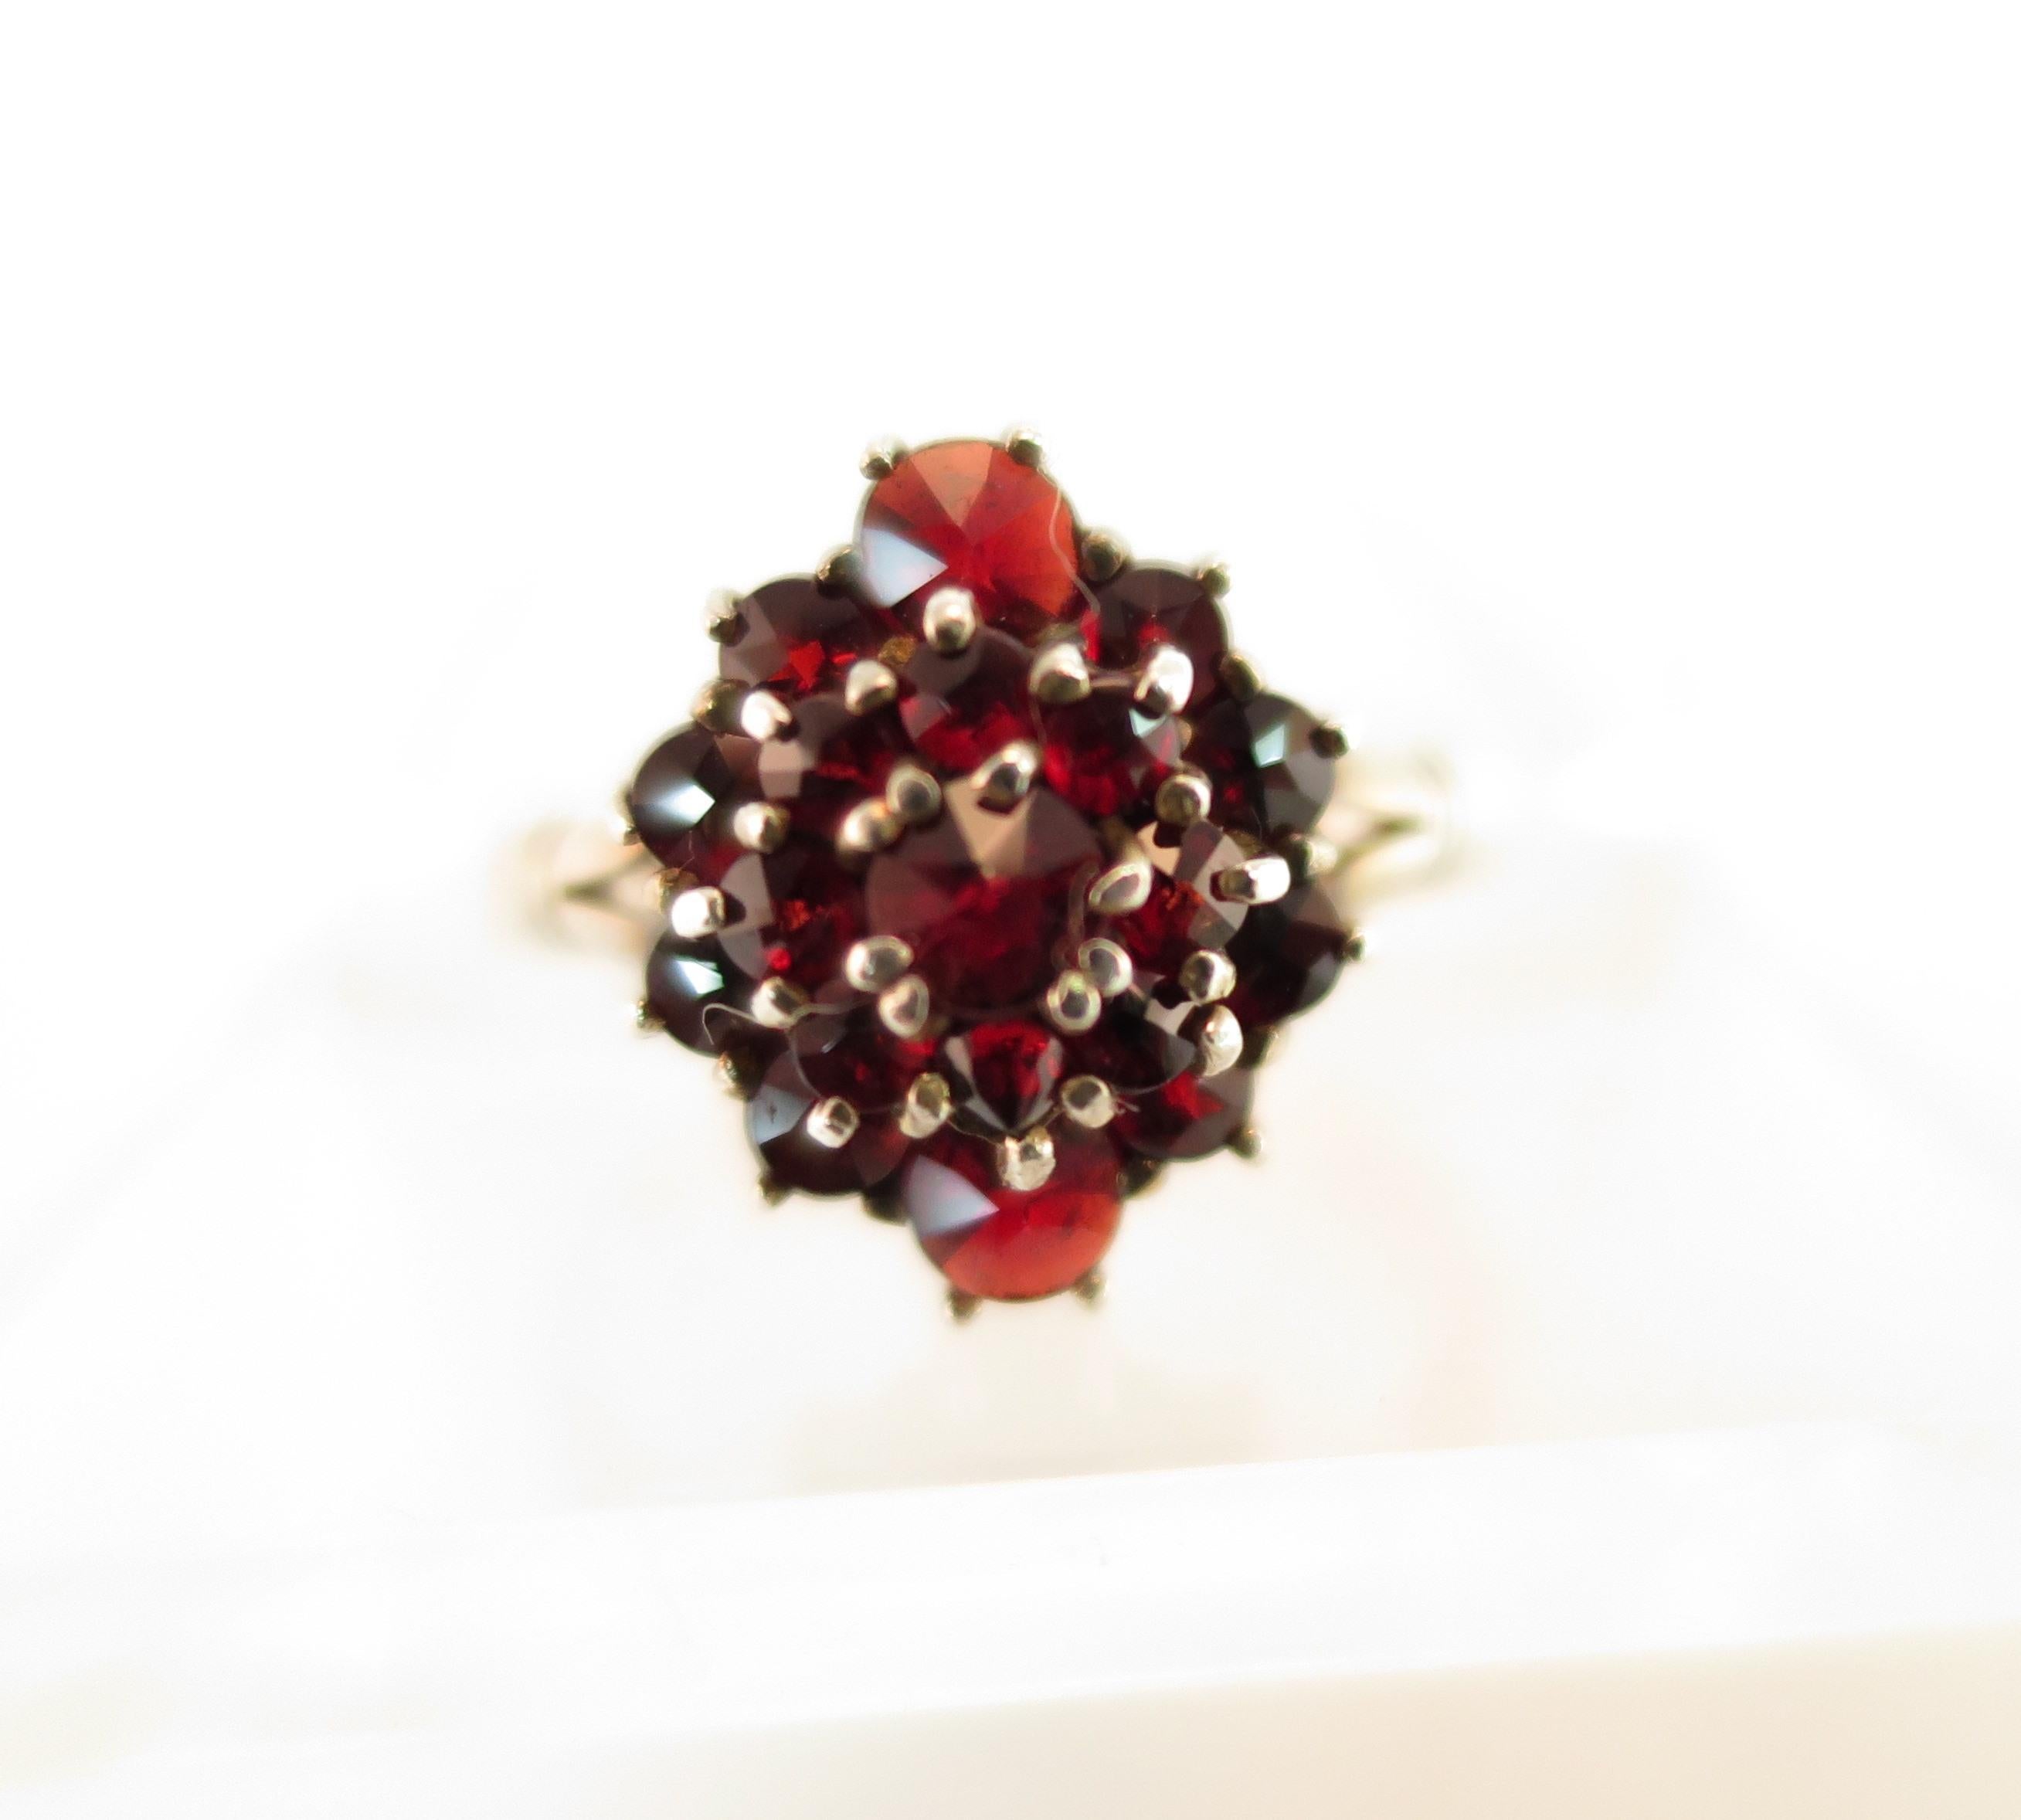 Offered here is a delicate Victorian ring of 900 silver set with rose-cut Bohemian pyrope garnets. The smooth band has etched horizontal bars where it splits slightly at the ends to meet the tiered platform that sparkles with prong-set stones above